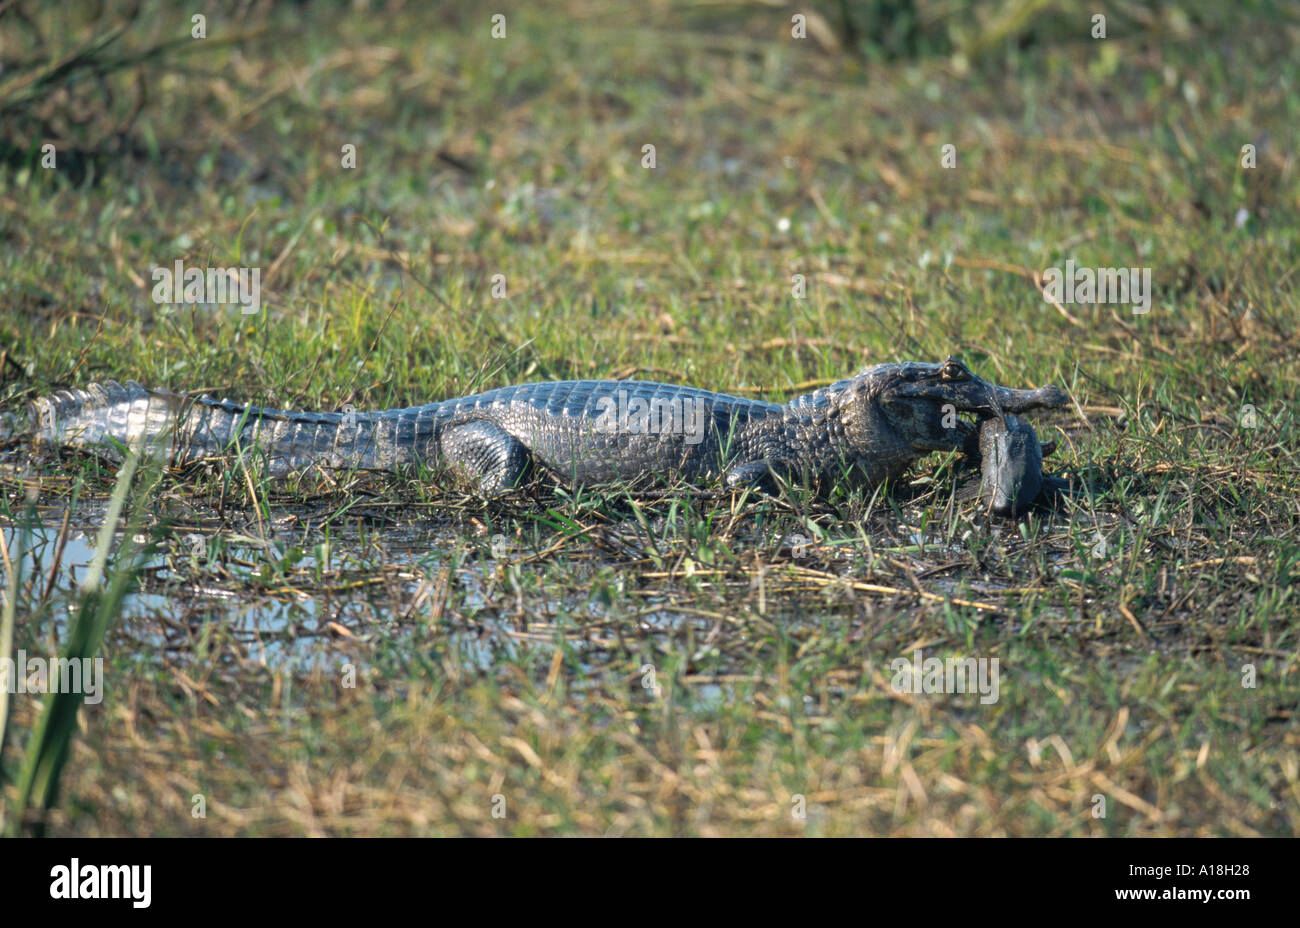 spectacled caiman (Caiman crocodilus), with caught fish in the mouth, Brazil, Mato Grosso, Pantanal. Stock Photo